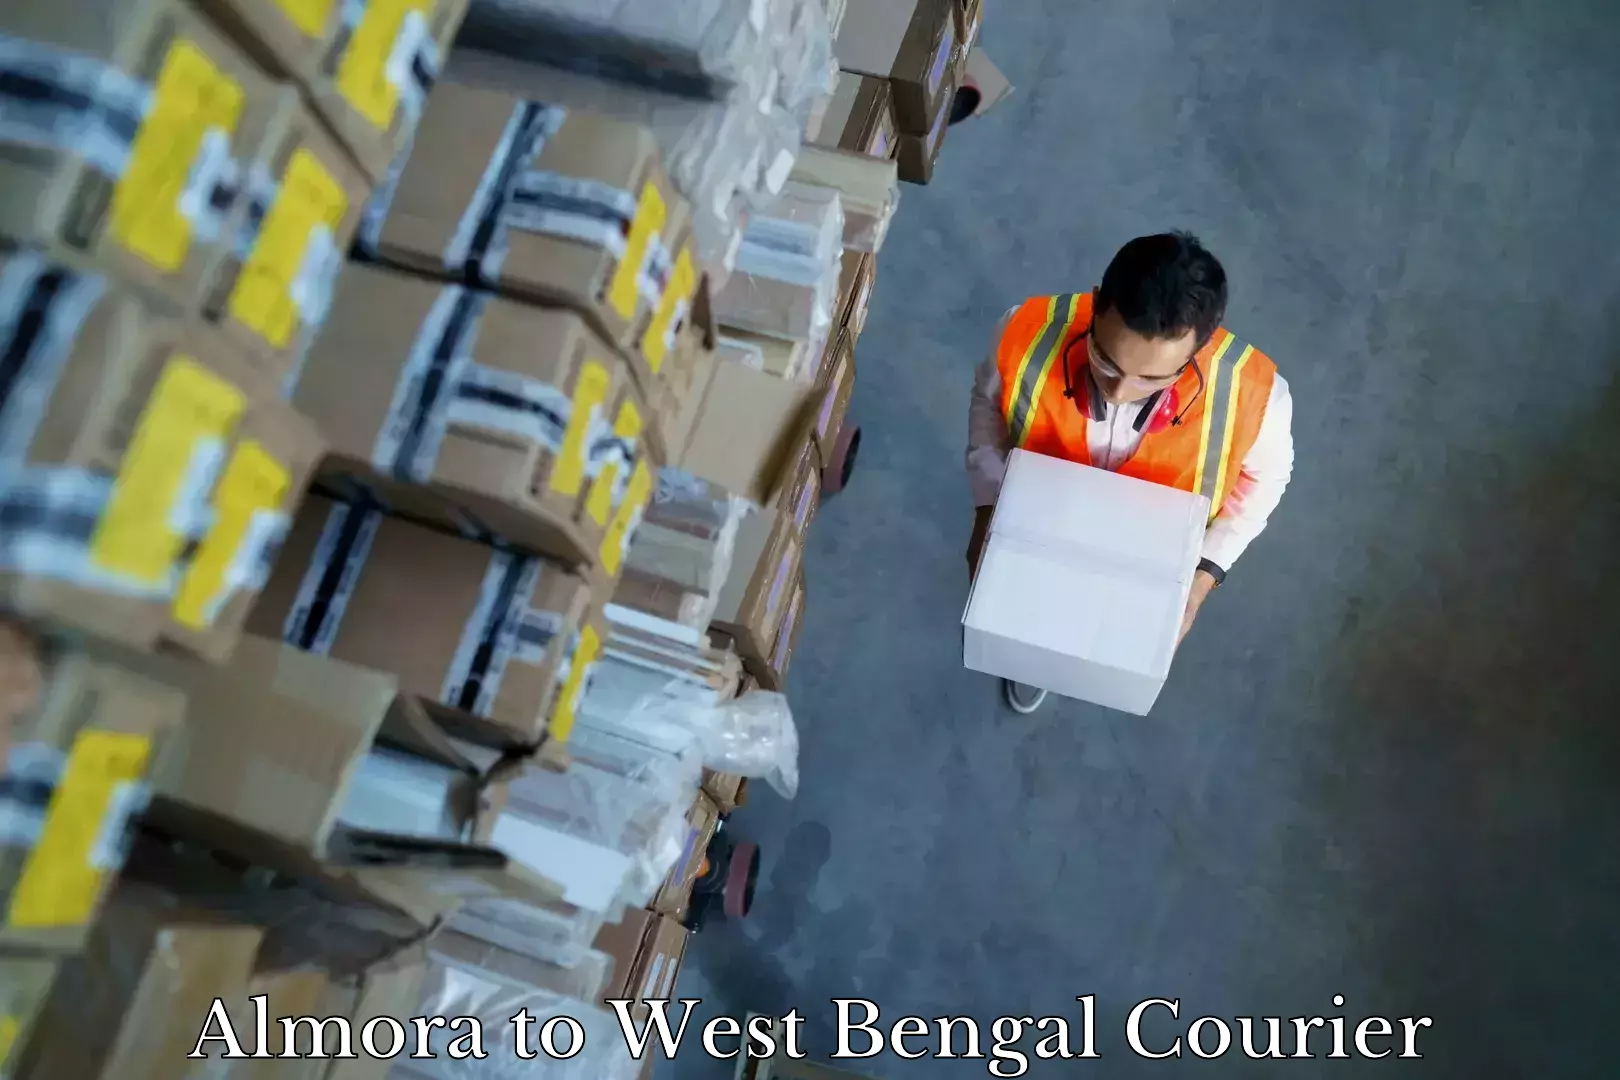 Furniture transport experts Almora to West Bengal